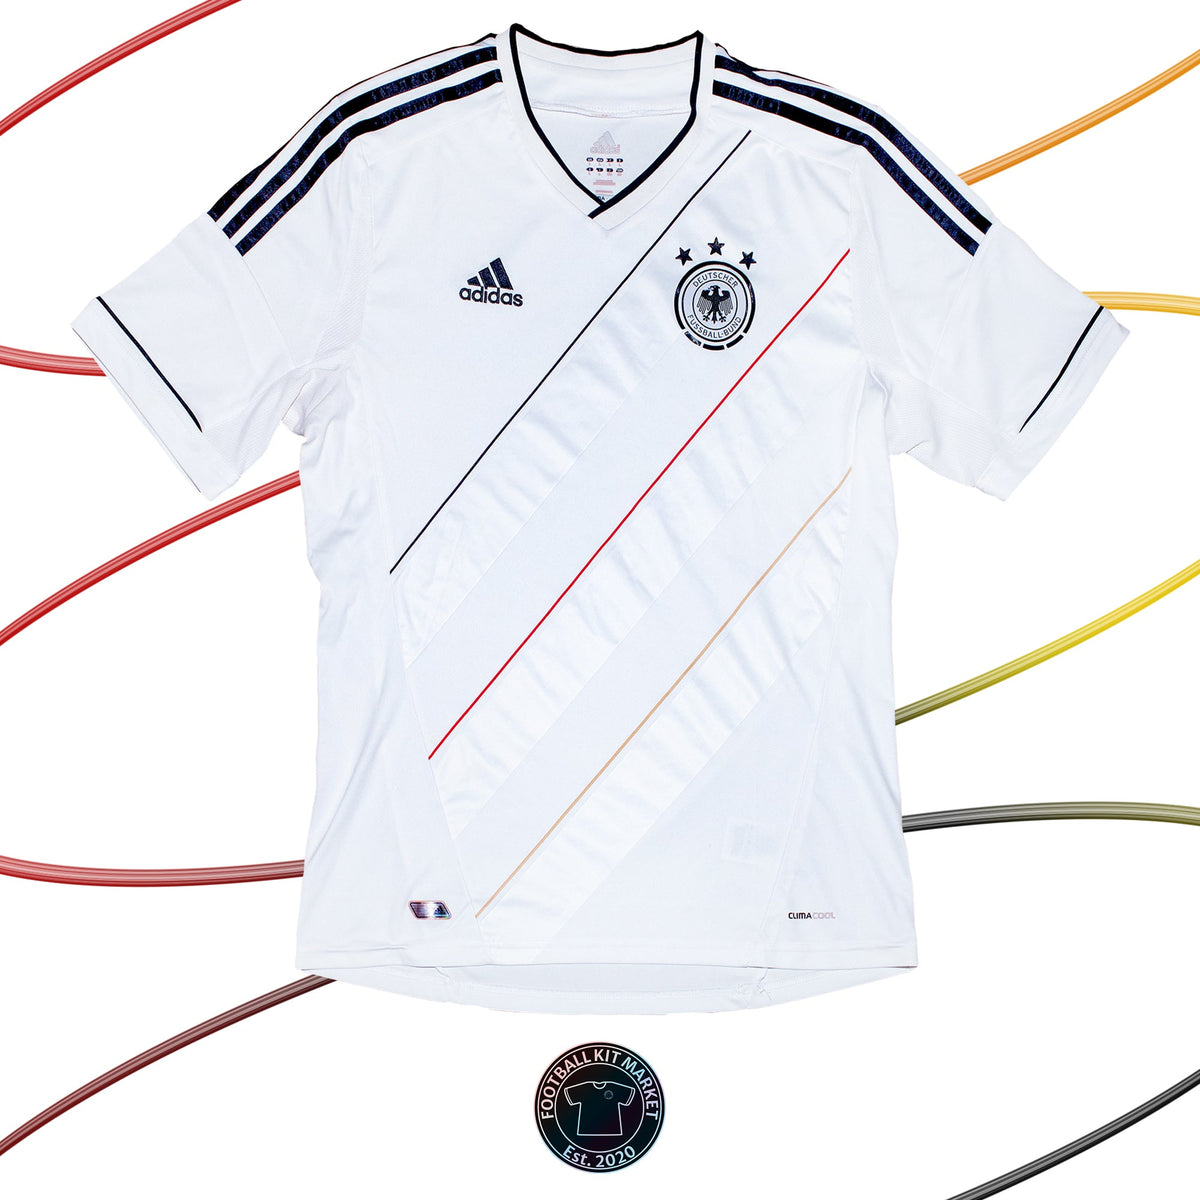 Genuine GERMANY Home Shirt (2012-2013) - ADIDAS (L) - Product Image from Football Kit Market